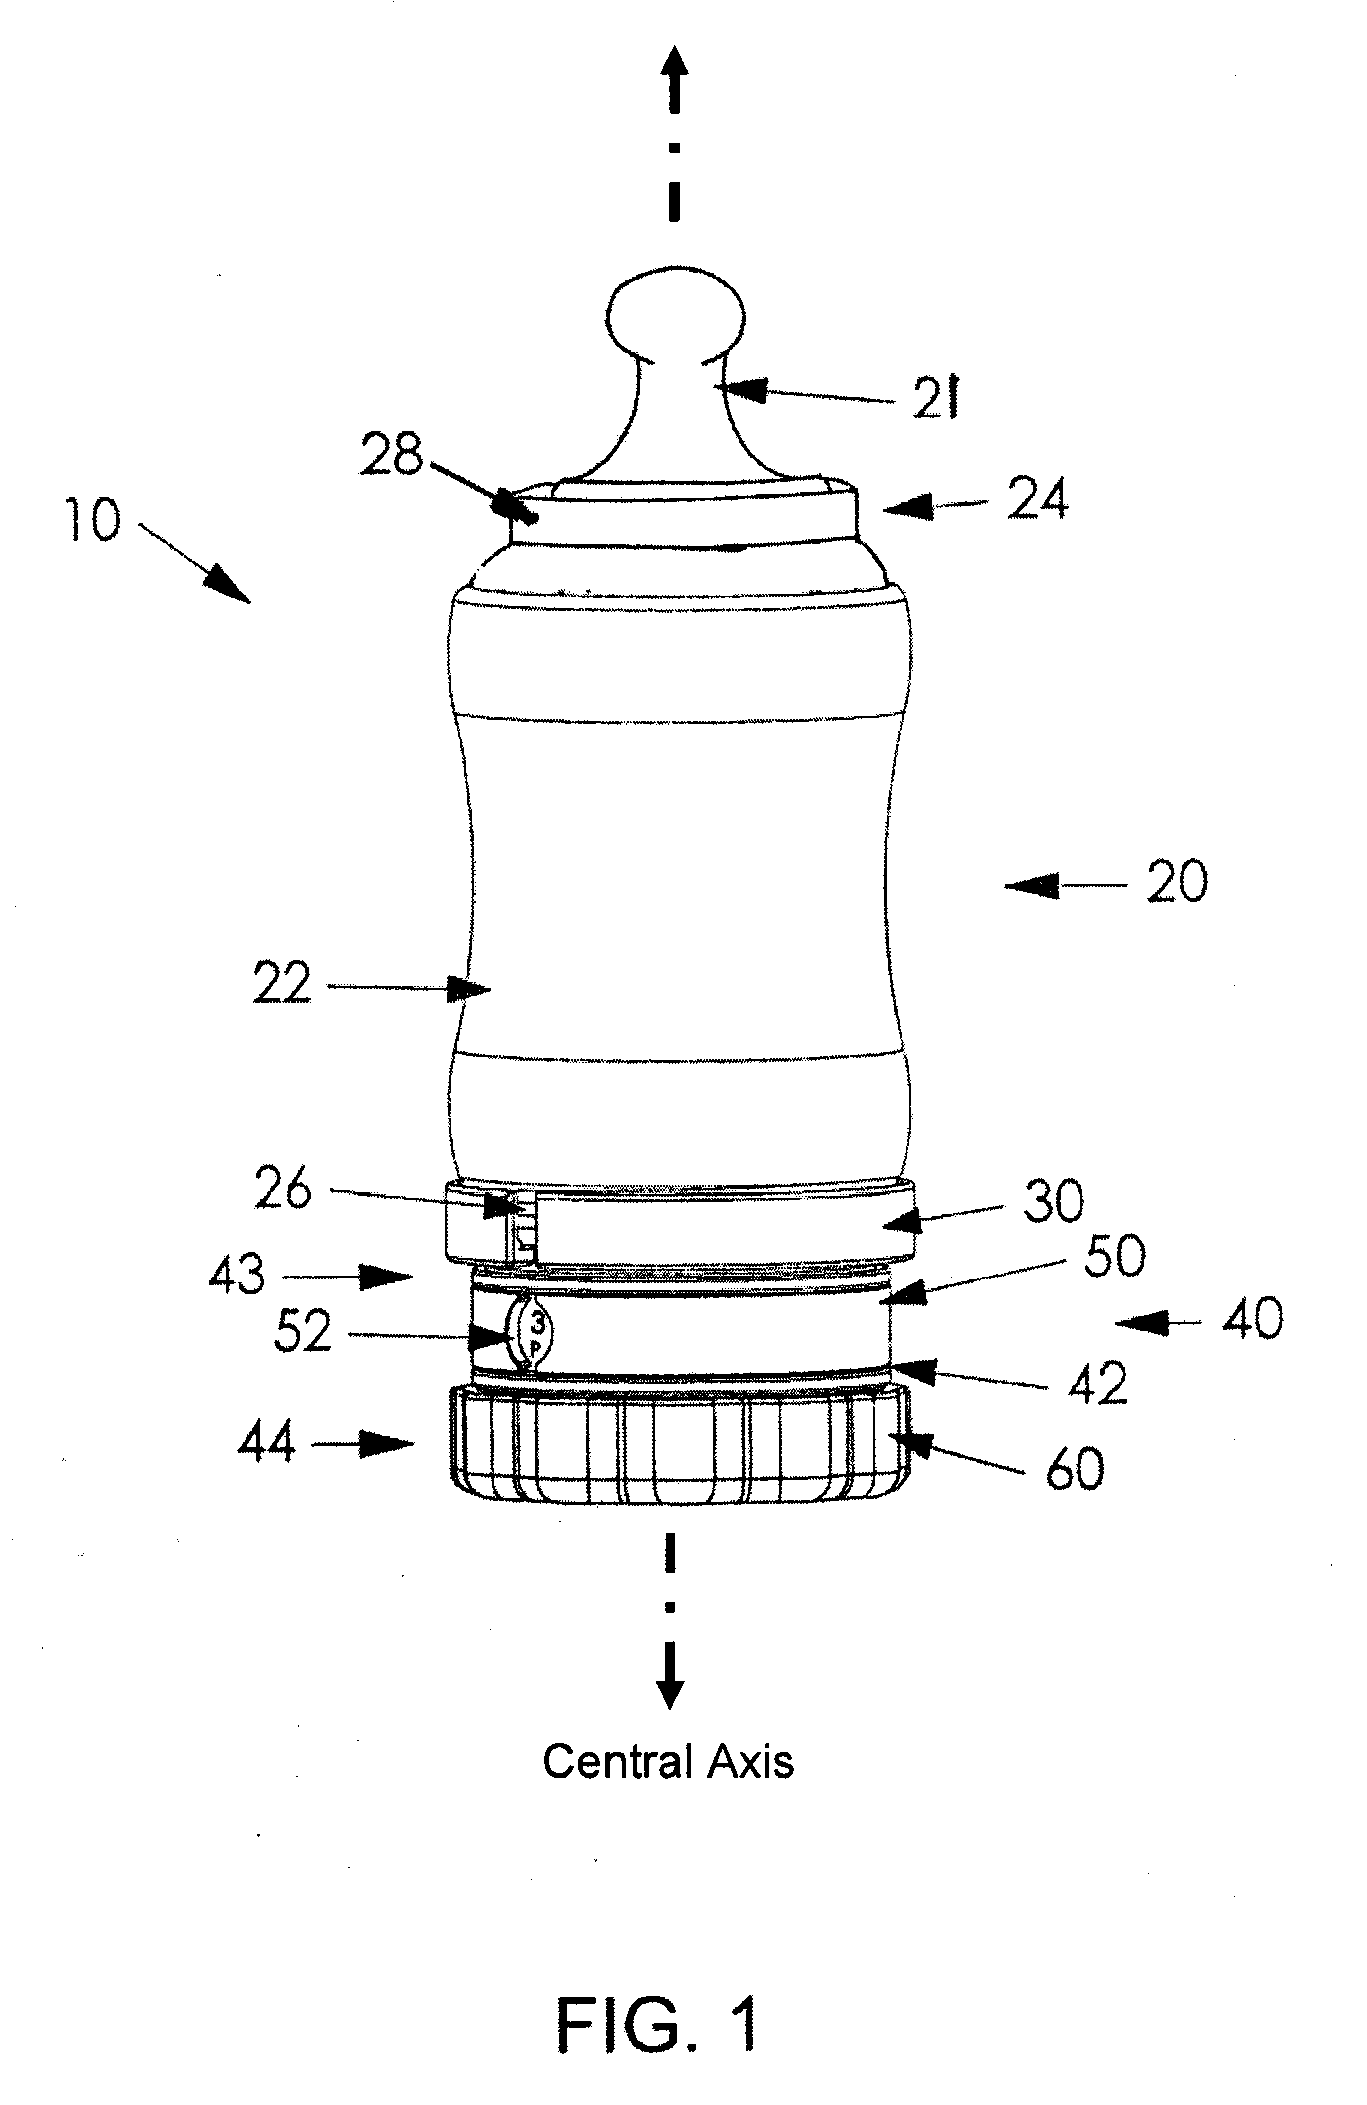 Stacked-container reusable bottle, system and method providing flexible use and mixing